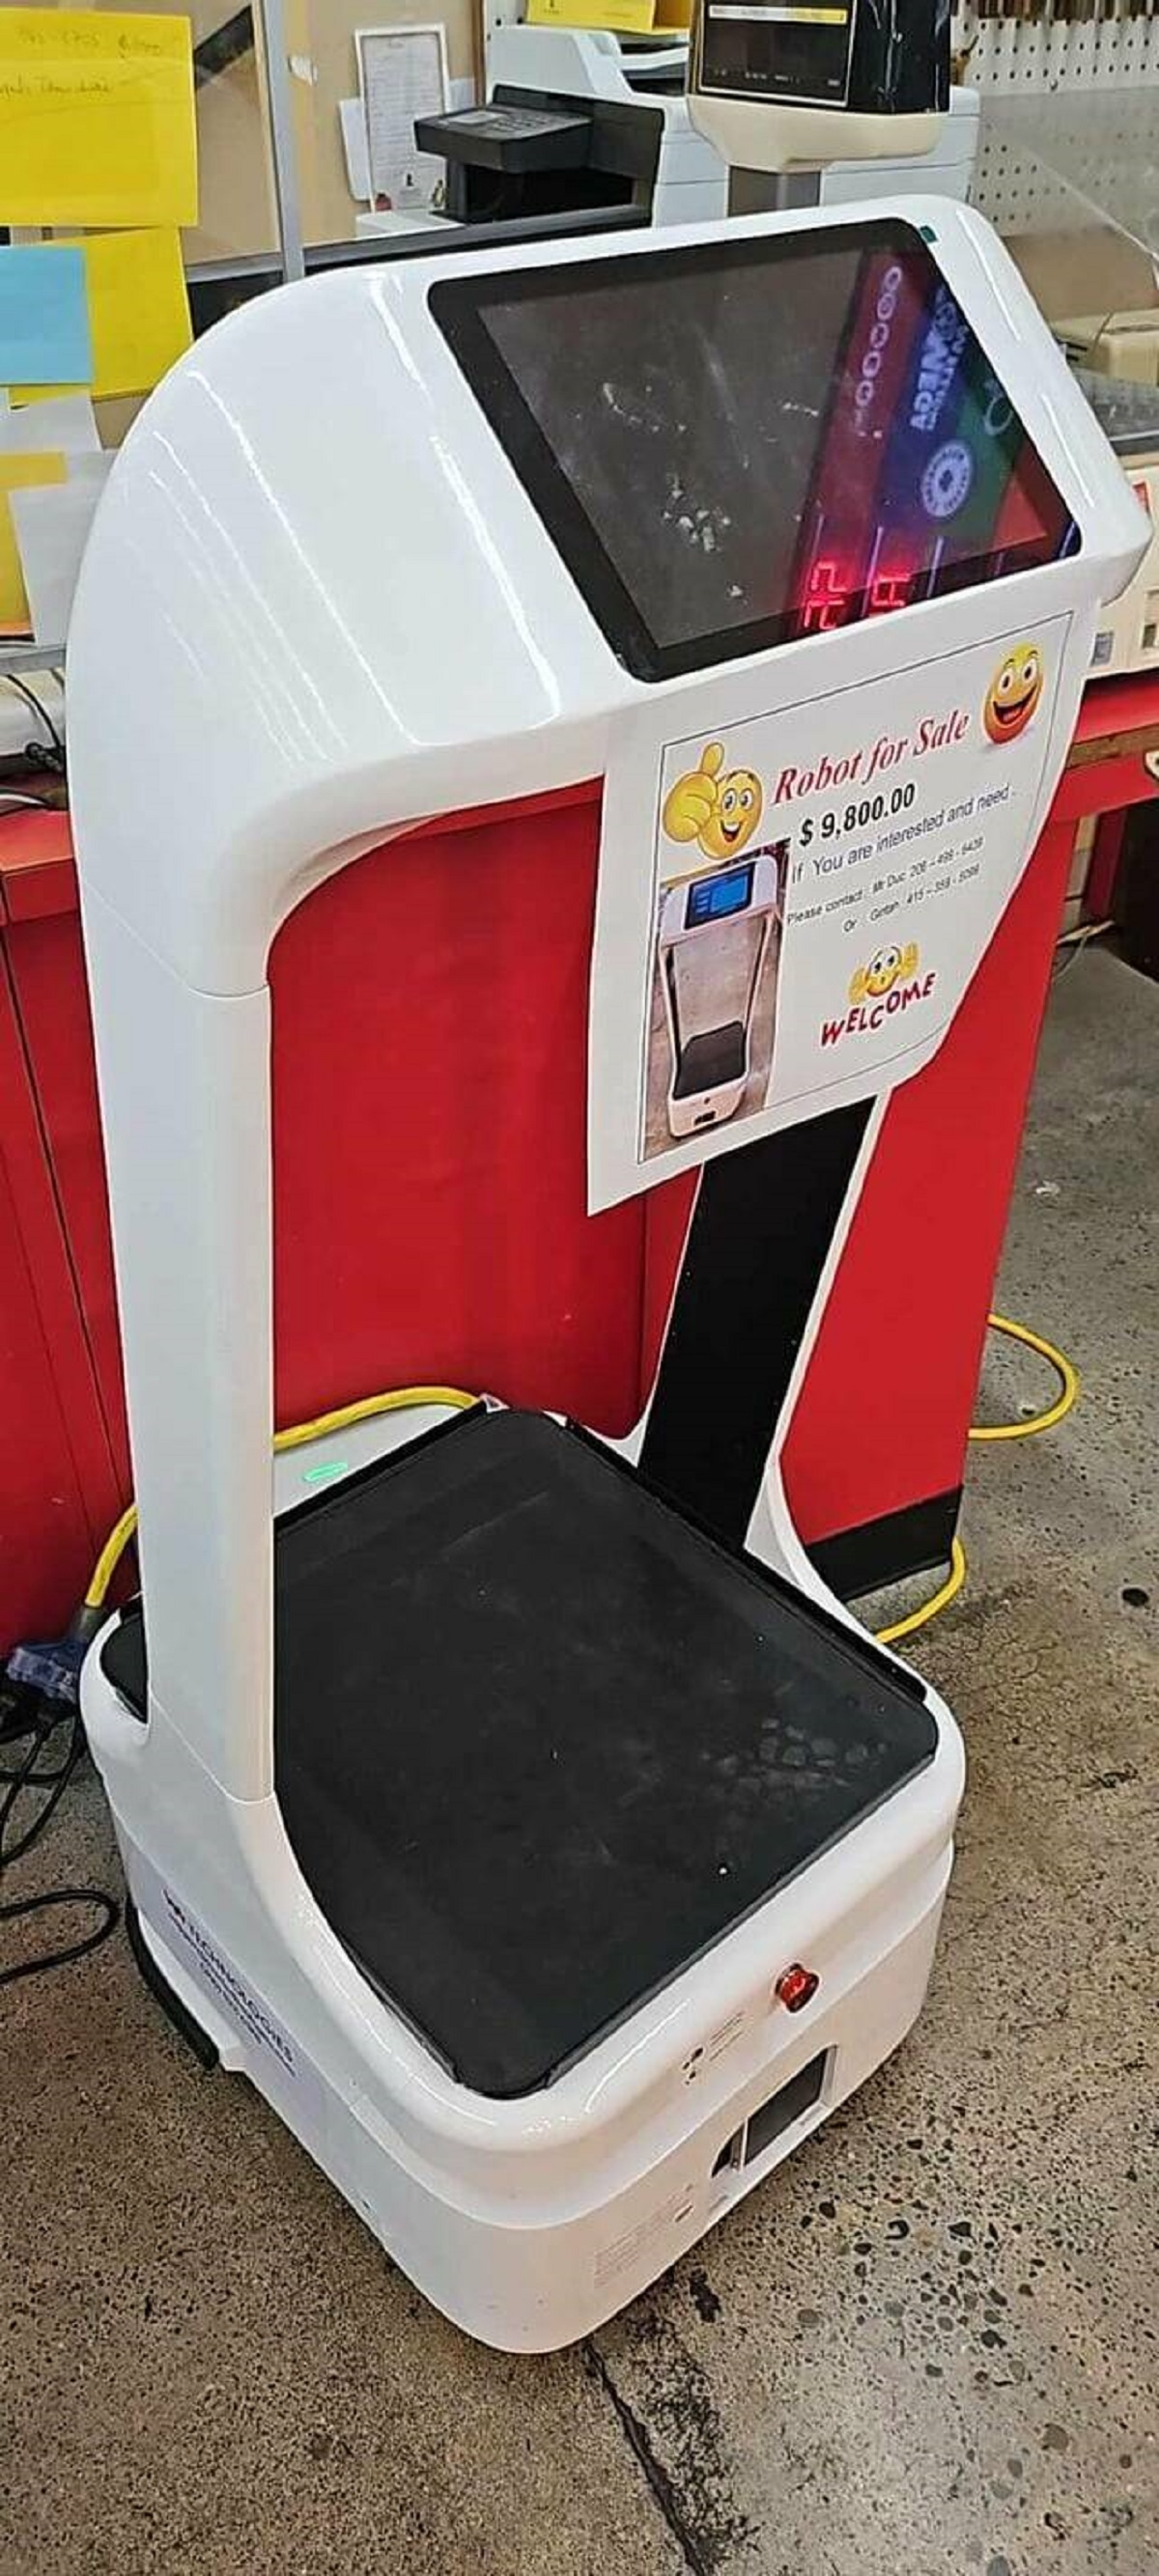 "My local Asian grocery store is selling this robot"